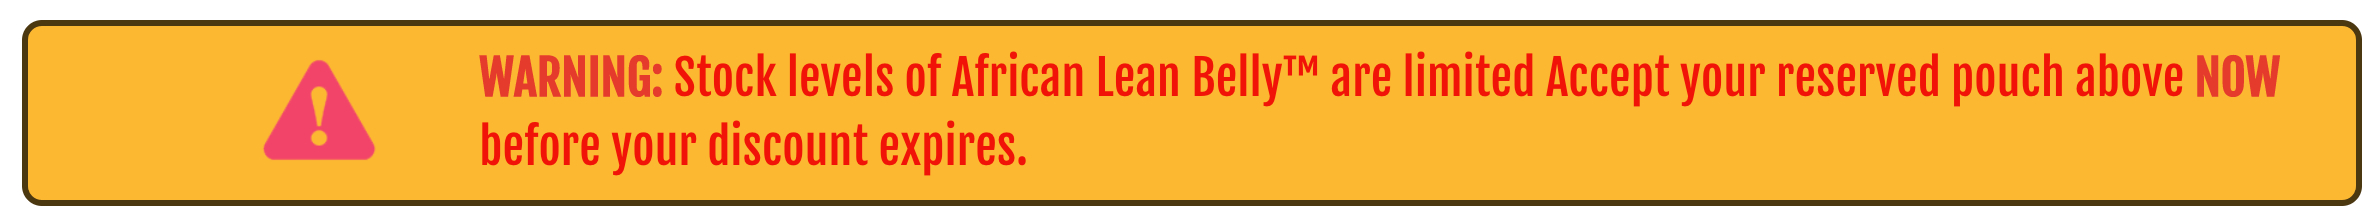 African Lean Belly - WARNING